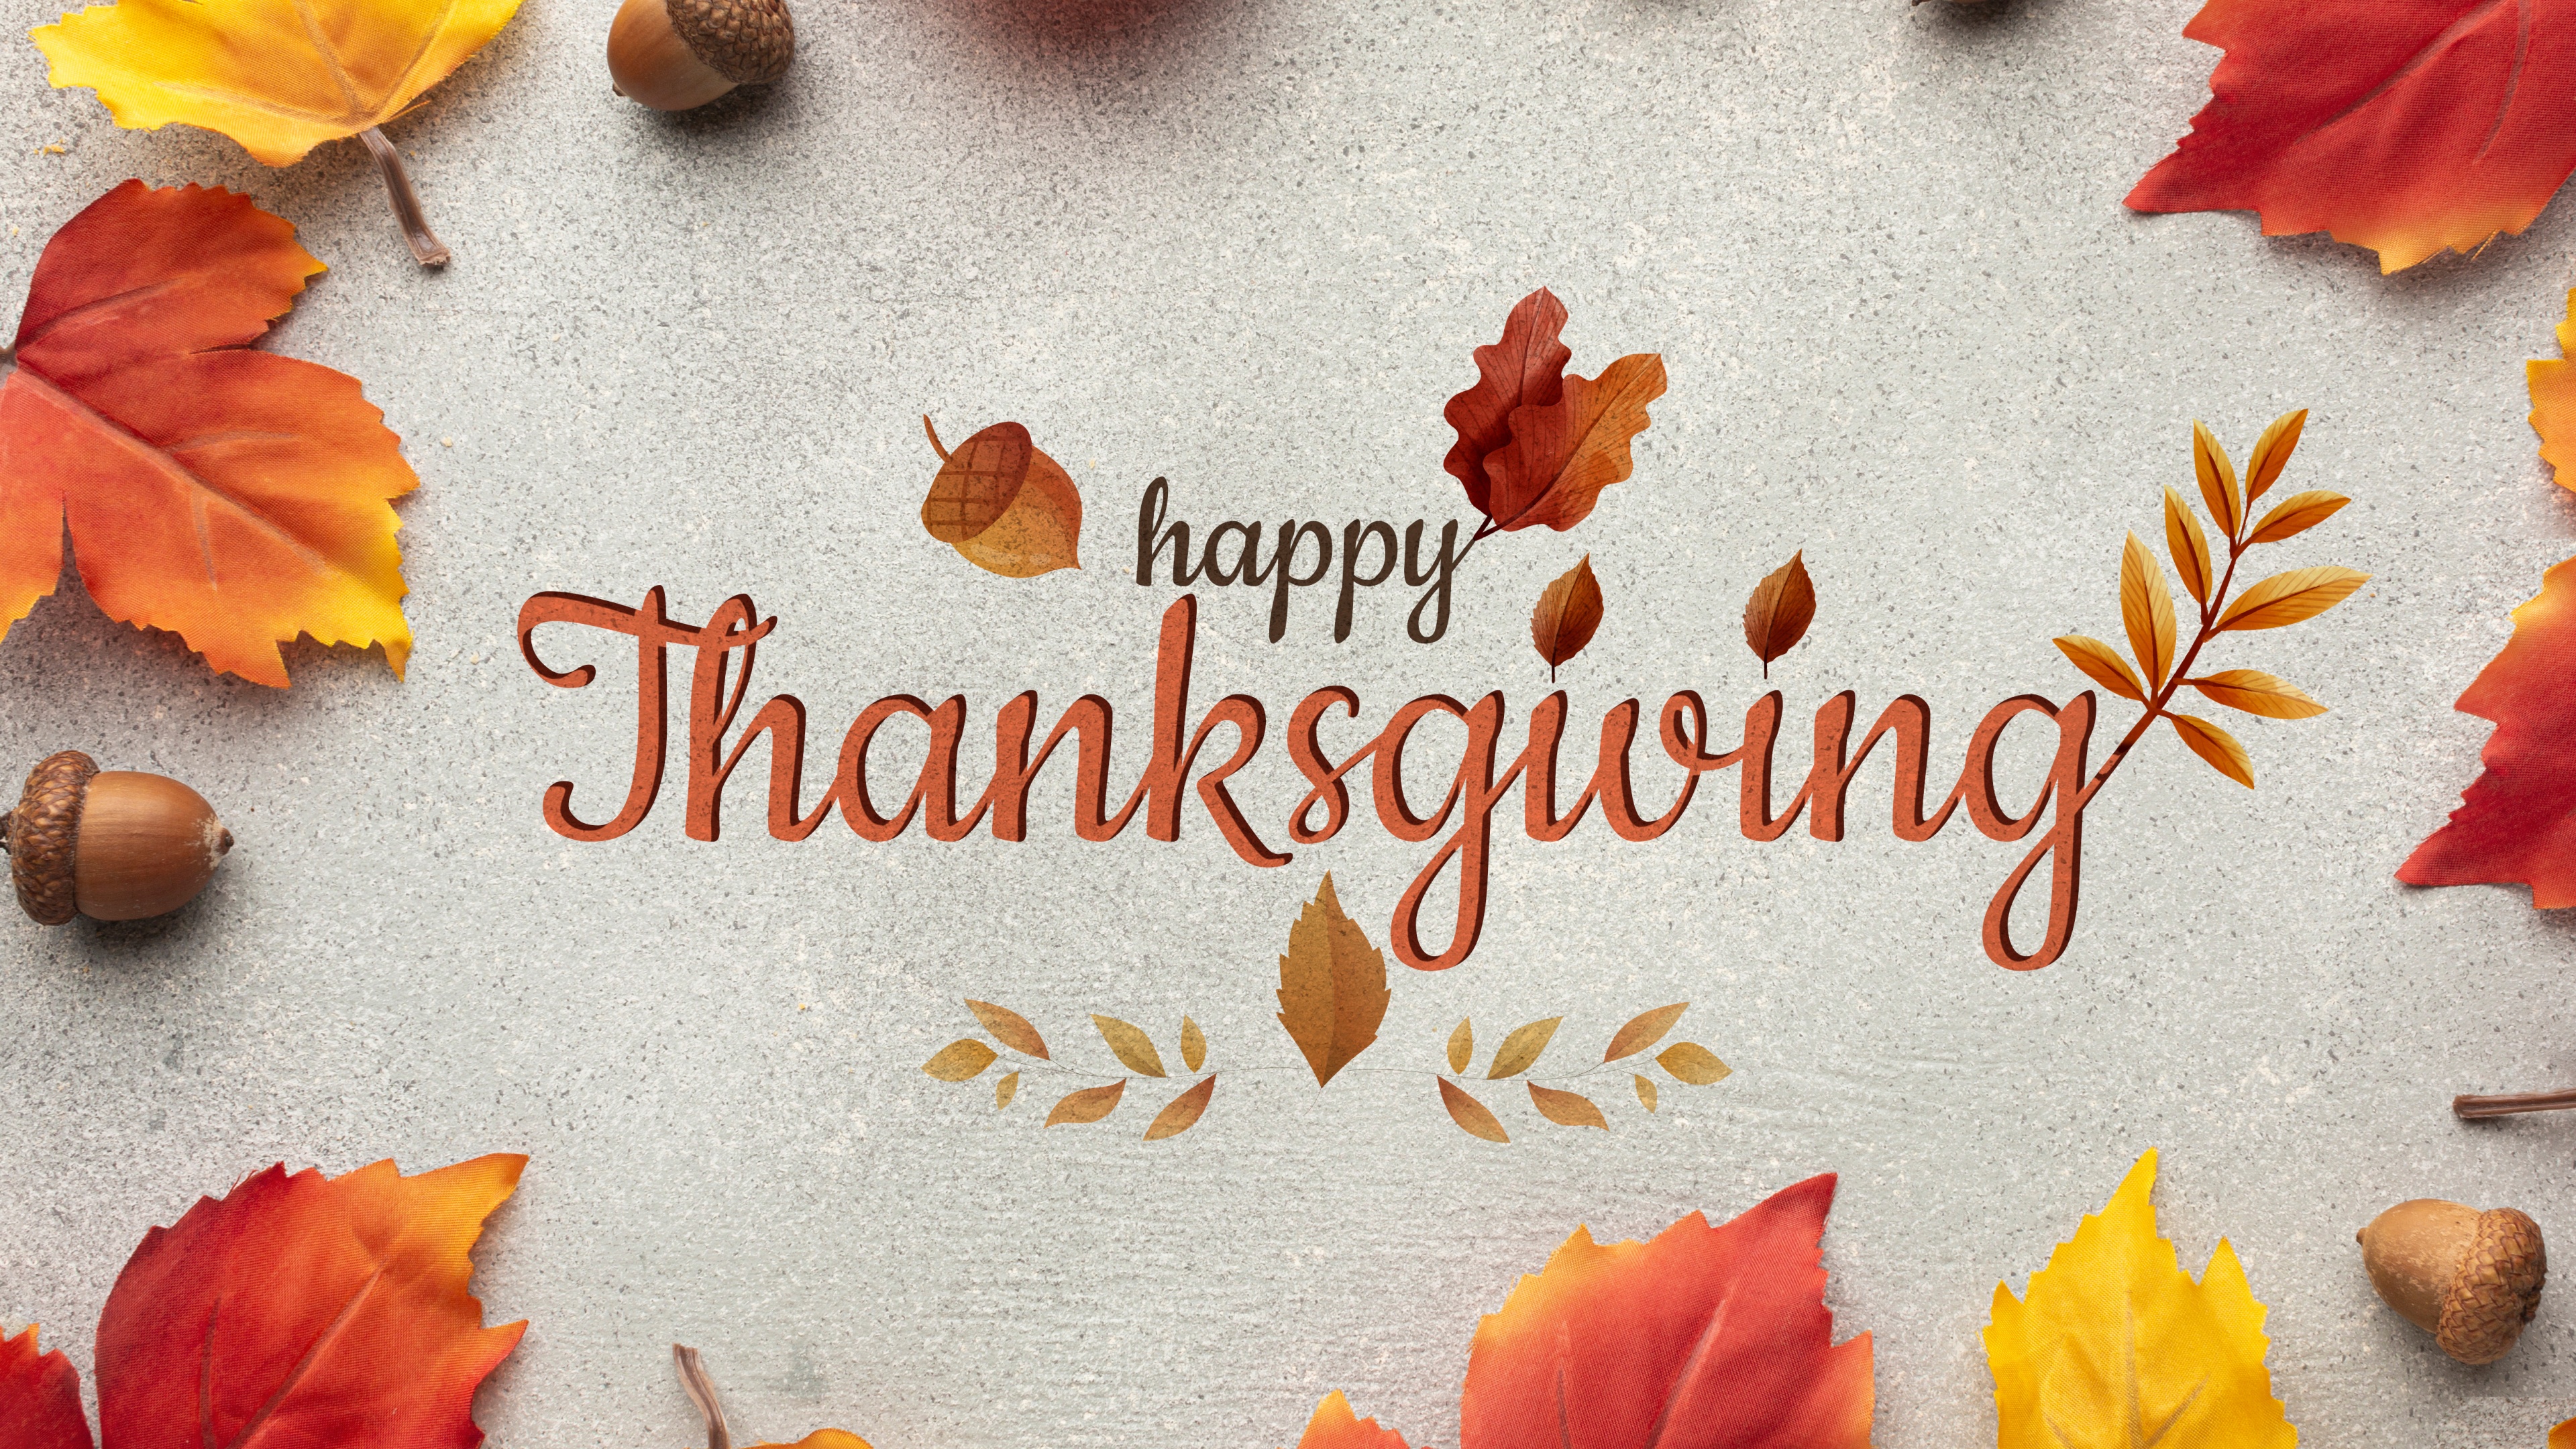 Download Happy Thanksgiving wallpapers for mobile phone free Happy  Thanksgiving HD pictures